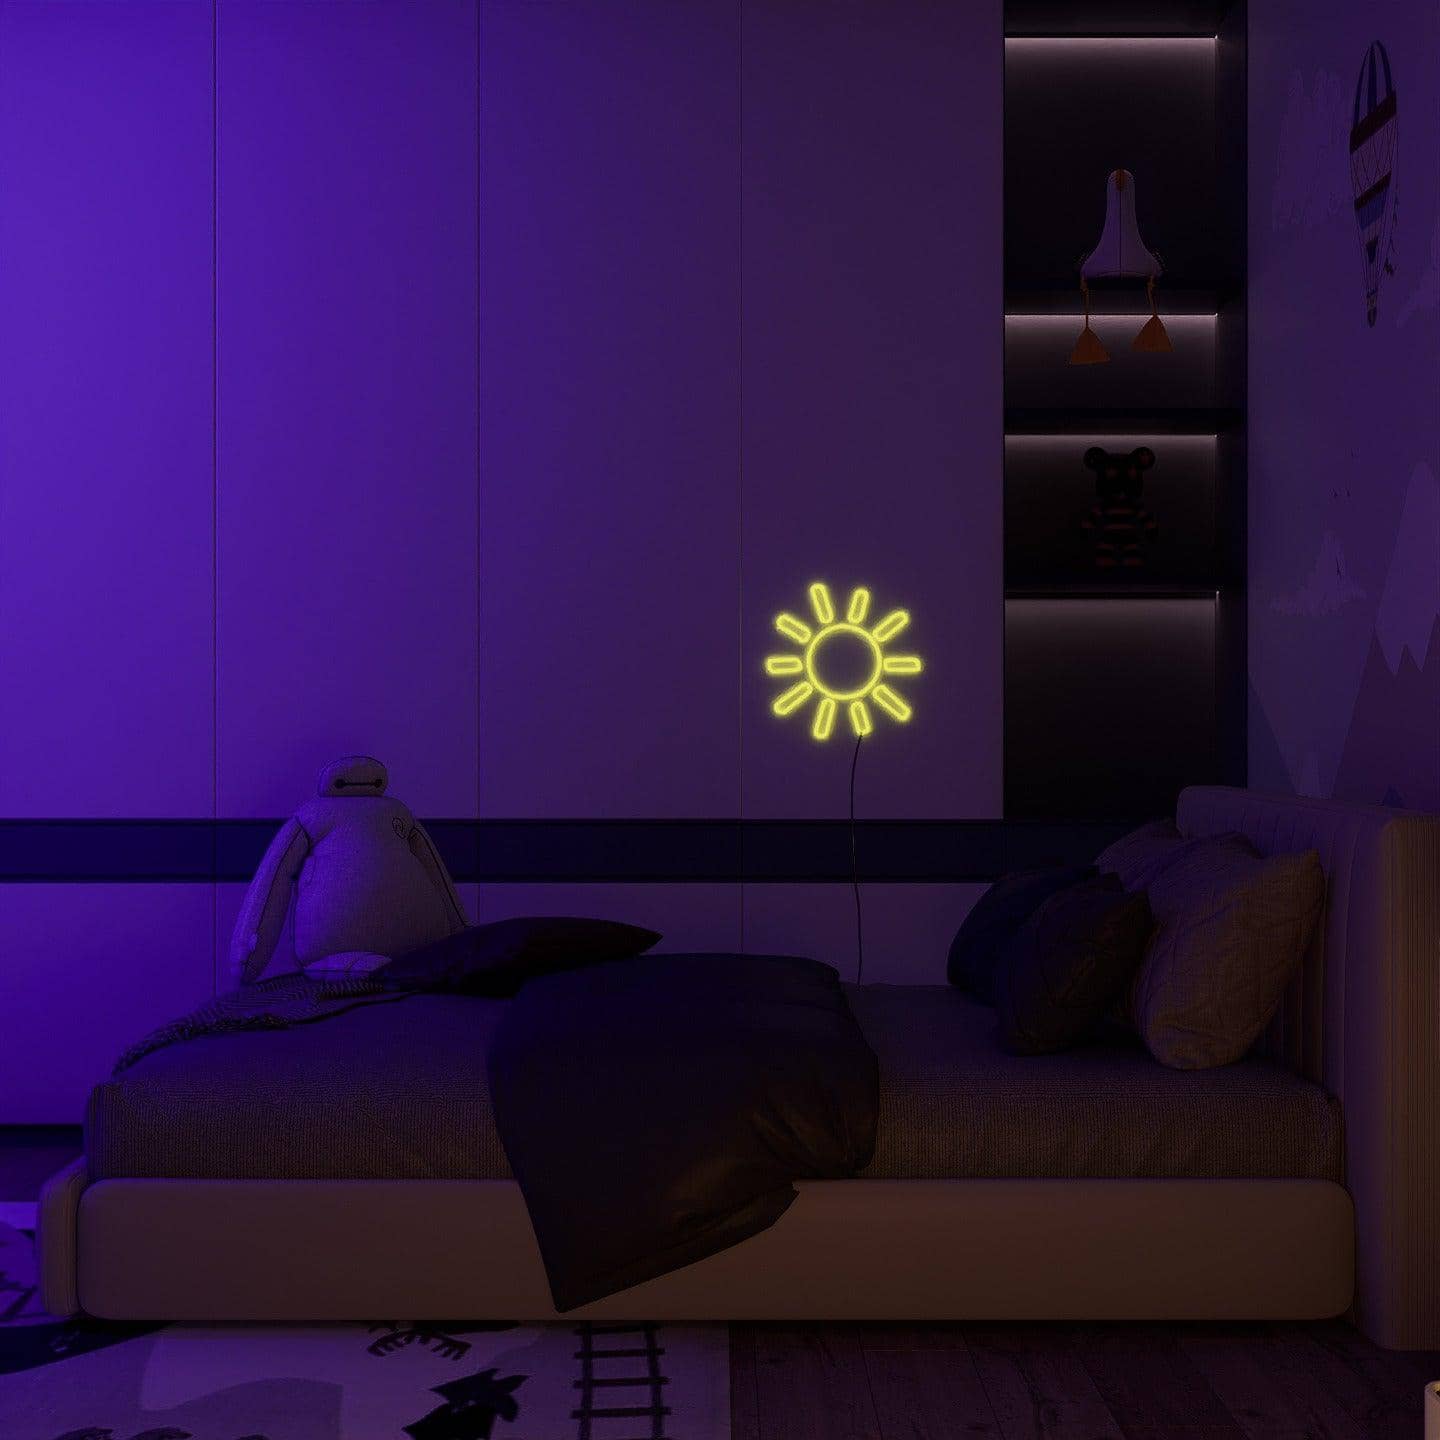 light-up-neon-lights-and-hang-them-in-your-bedroom-for-display-solar-burst